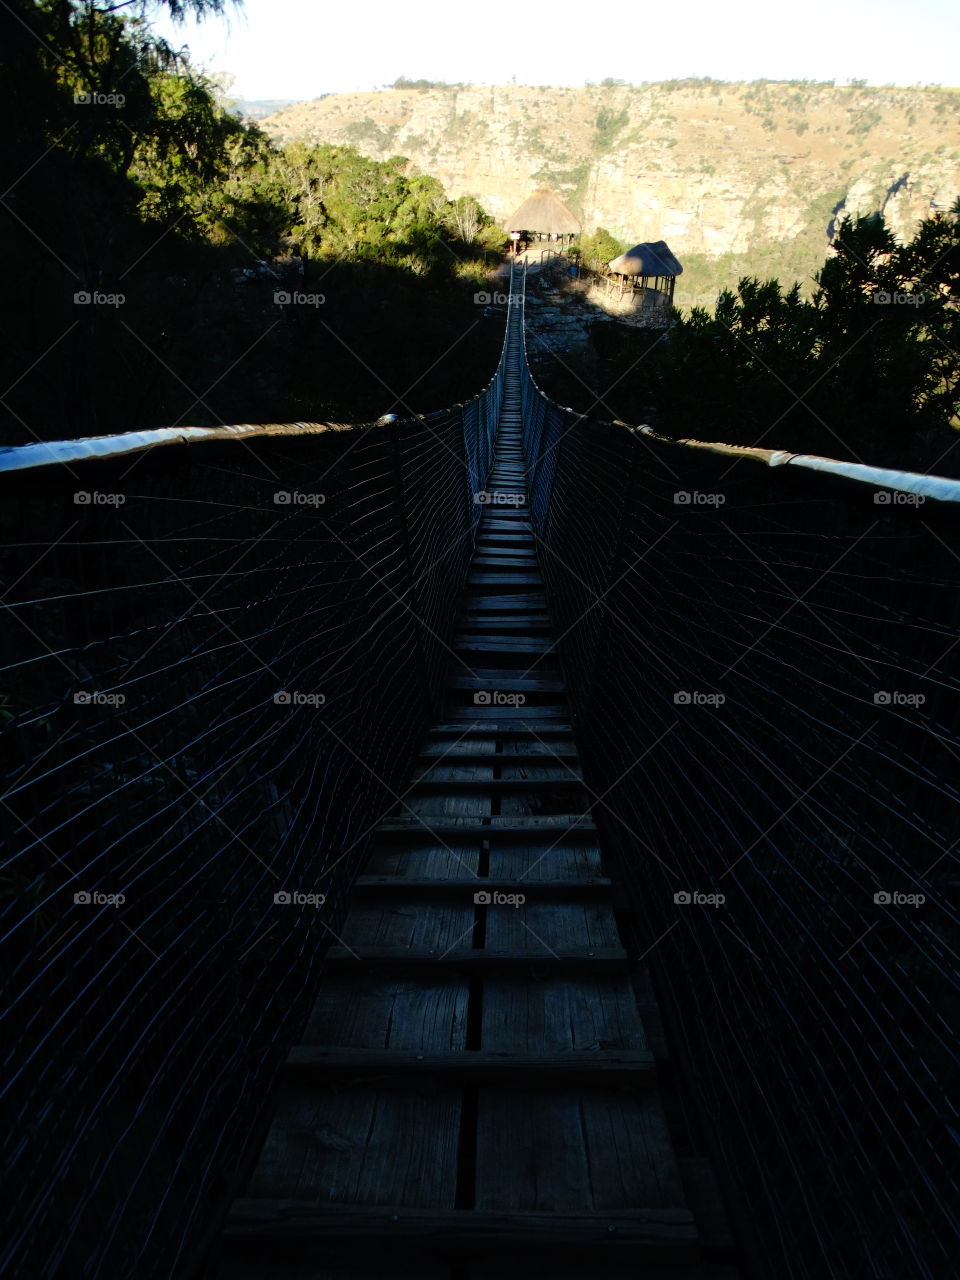 A suspension bridge only taken by the brave. If you have height issues, then don't brave it...

But cross it and see the vast beauty of the amazing game Reserve in the Oribi Gorge of Lake Eland. 